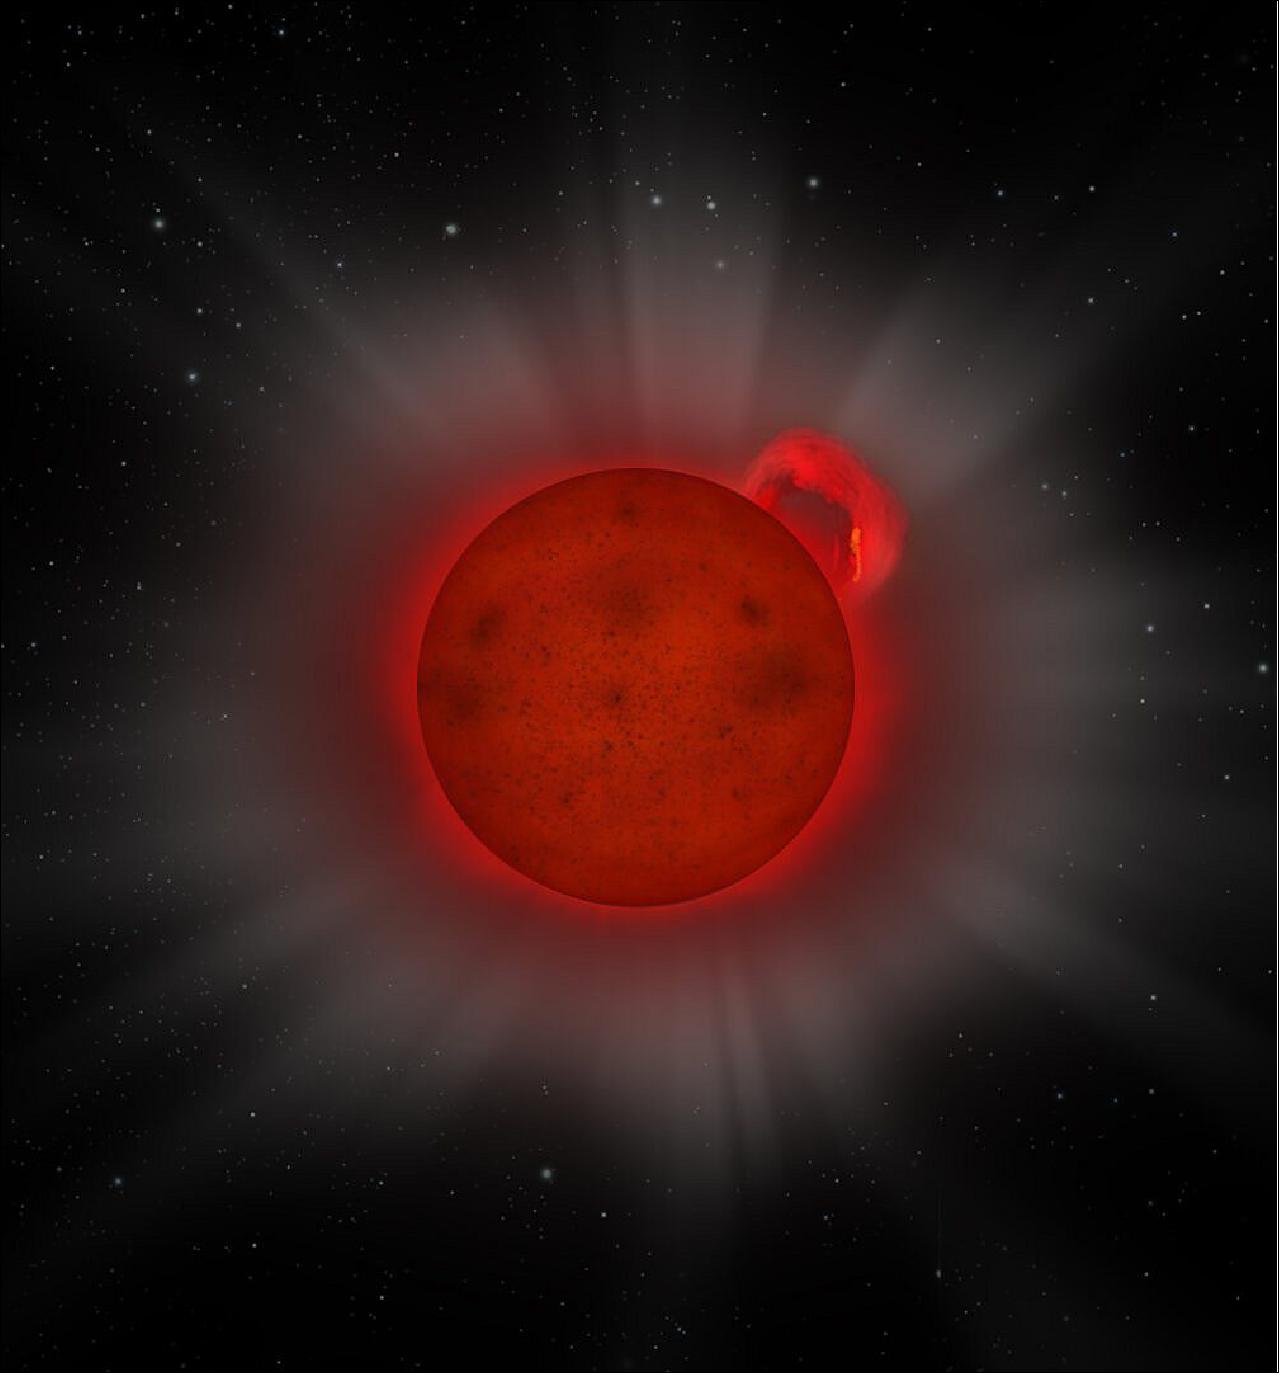 Figure 41: Artist's impression of an L dwarf star, a star with so little mass that it is only just above the boundary of actually being a star, caught in the act of emitting an enormous ‘super flare’ of X-rays, as detected by ESA's XMM-Newton X-ray space observatory. Astronomers spotted the enormous X-ray flare in data recorded on 5 July 2008 by the European Photon Imaging Camera (EPIC) onboard XMM-Newton. In a matter of minutes, the tiny star, known by its catalog number J0331-27, released more than ten times more energy of even the most intense flares suffered by the Sun (image credit: ESA)